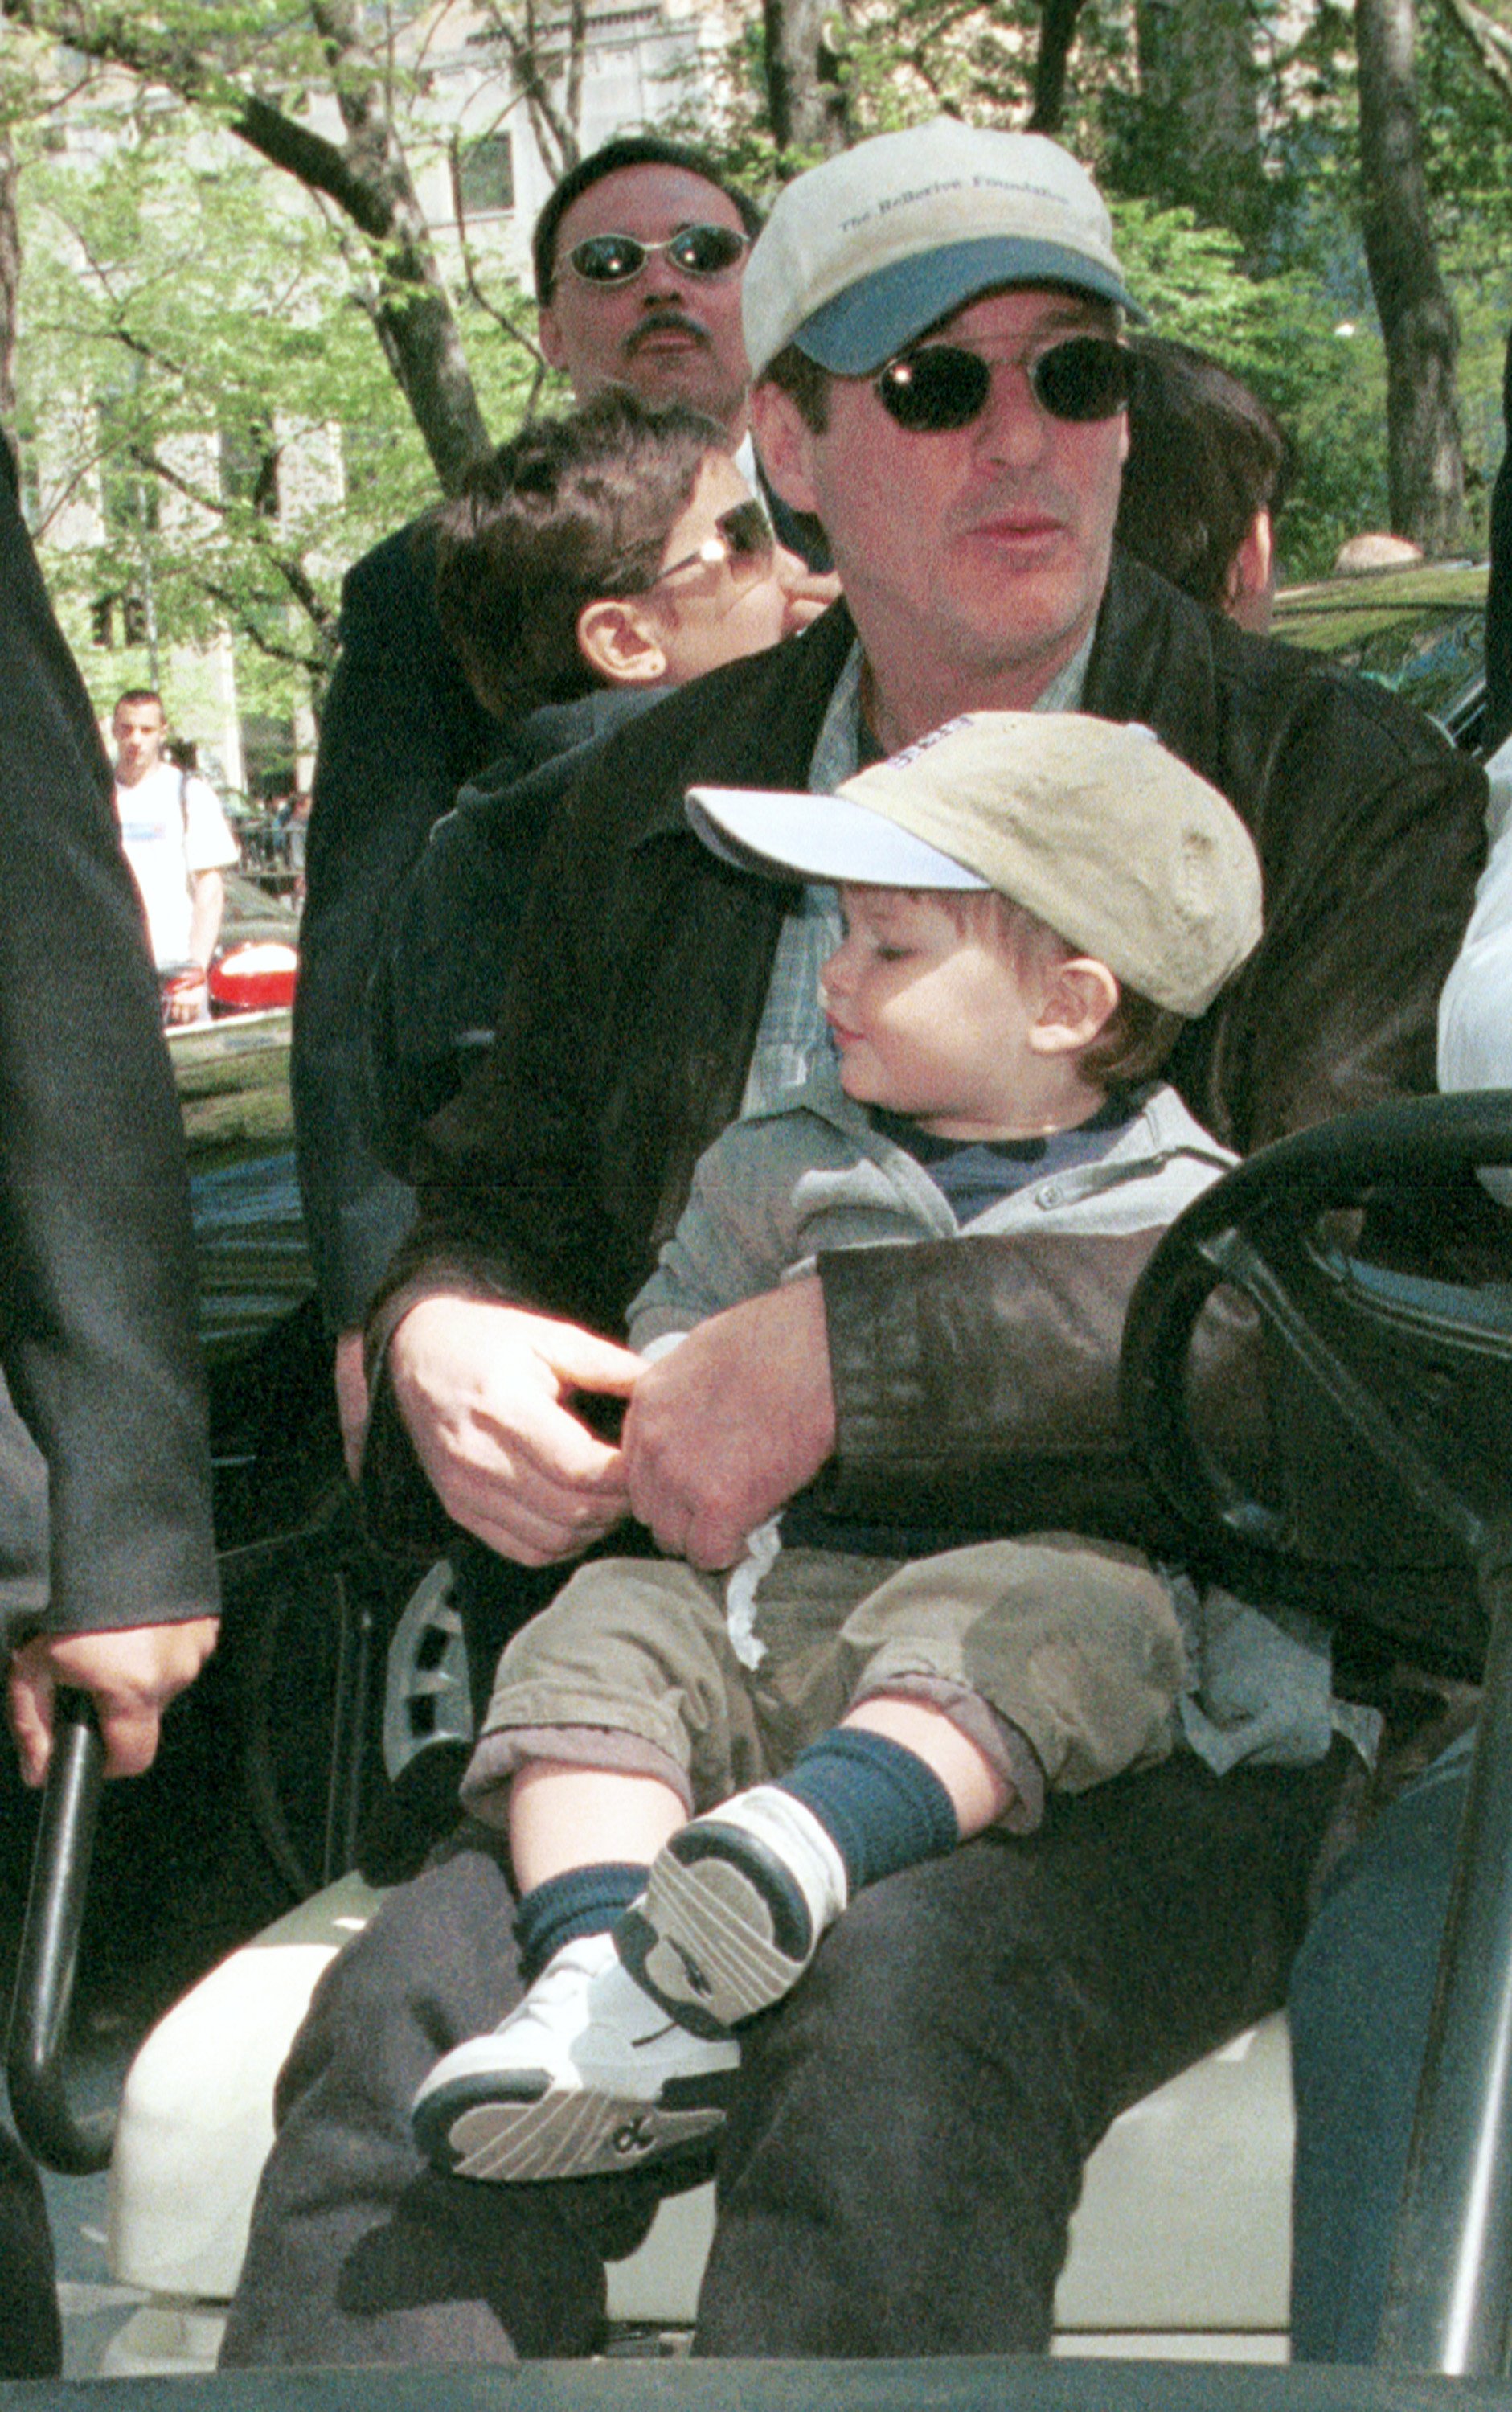 Richard Gere and his son Homer James Jigme Gere arriving for the "Kids for Kids" Carnival on April 29, 2001 in New York City's Central Park. / Source: Getty Images